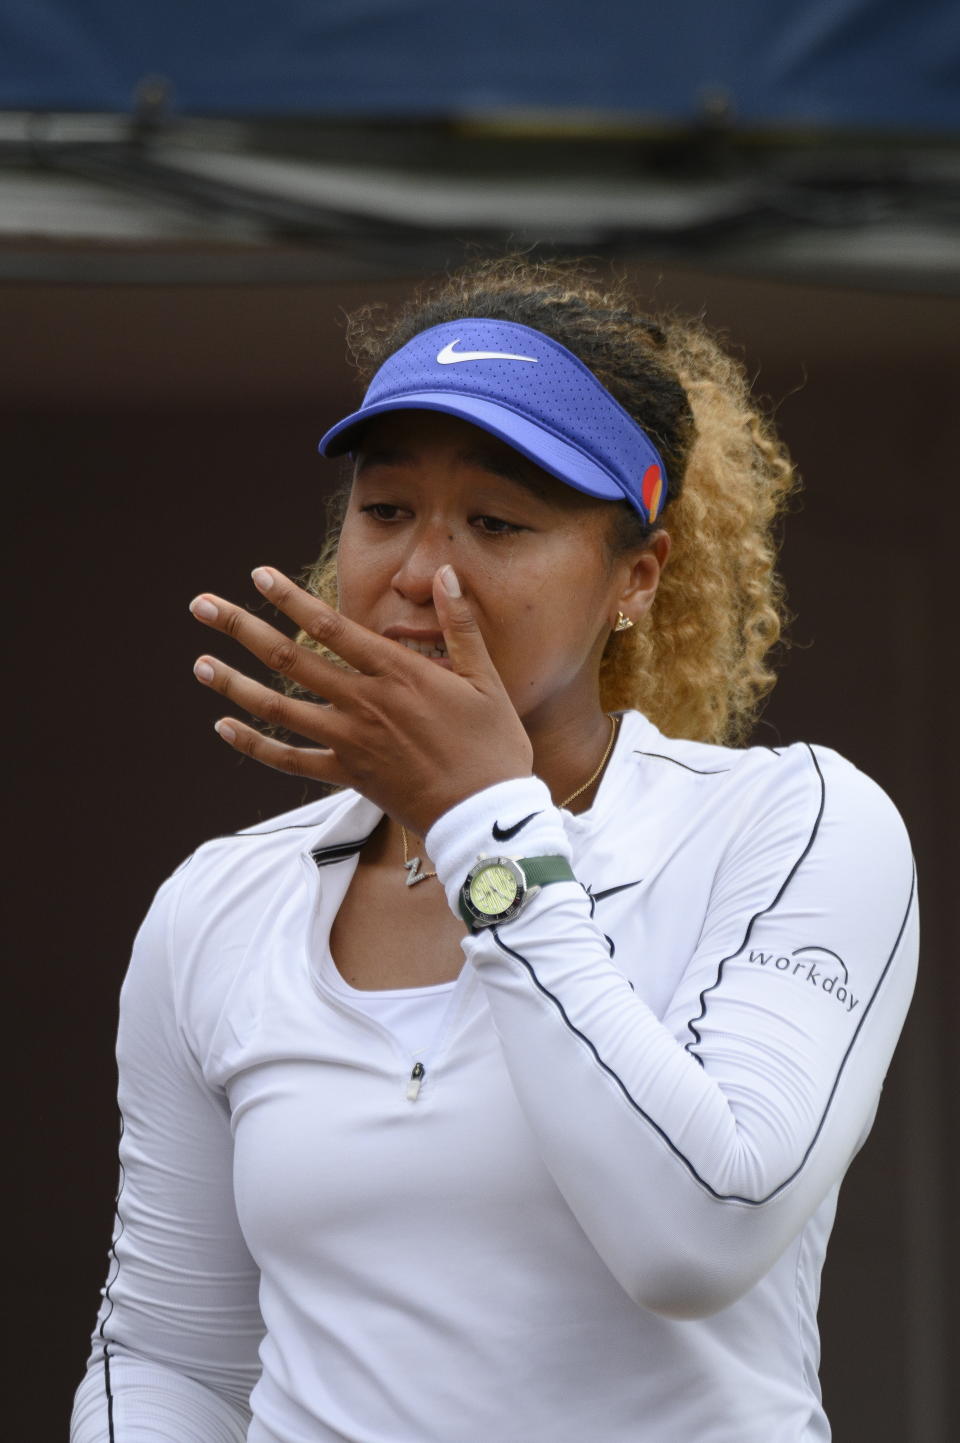 Naomi Osaka wipes a tear after retiring early from a match against Kaia Kanepi of Estonia, during the National Bank Open tennis tournament in Toronto, on Tuesday, Aug. 9, 2022. (Christopher Katsarov/The Canadian Press via AP)